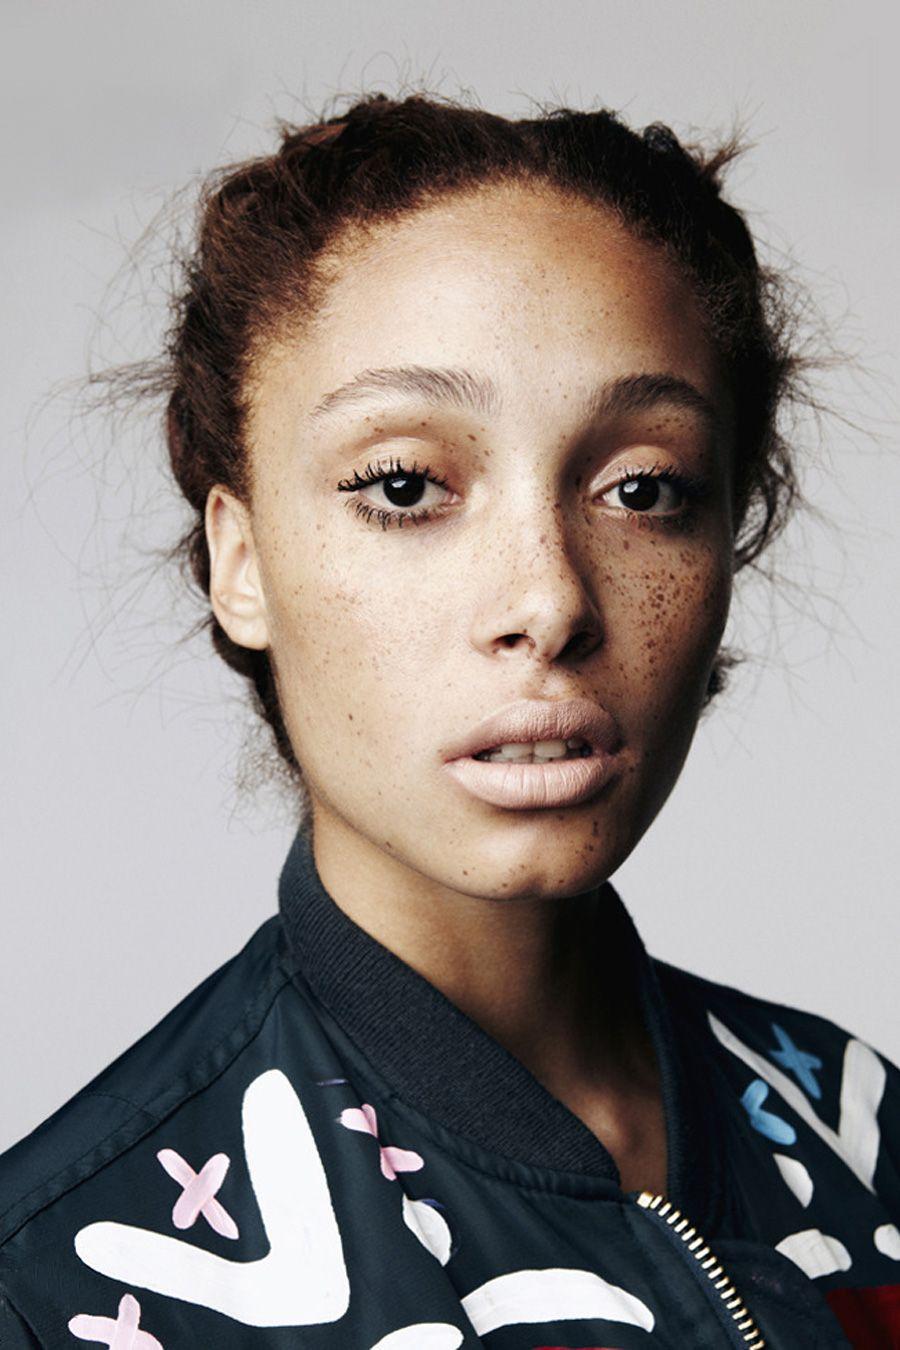 Adwoa Aboah. Because she looks like she could be our daughter, at